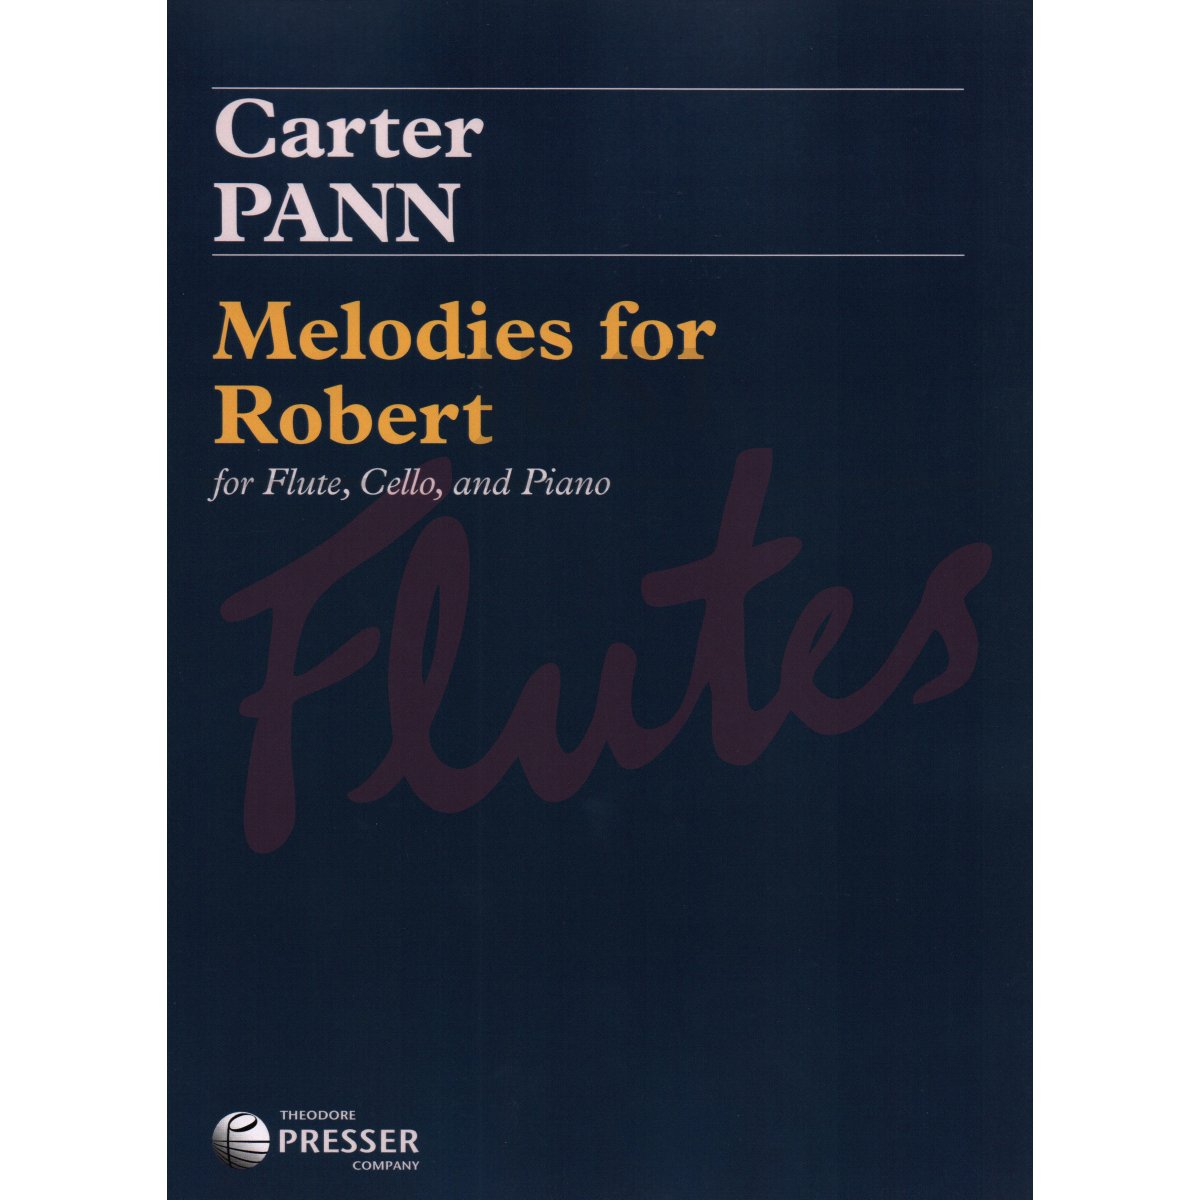 Melodies for Robert for Flute, Cello and Piano